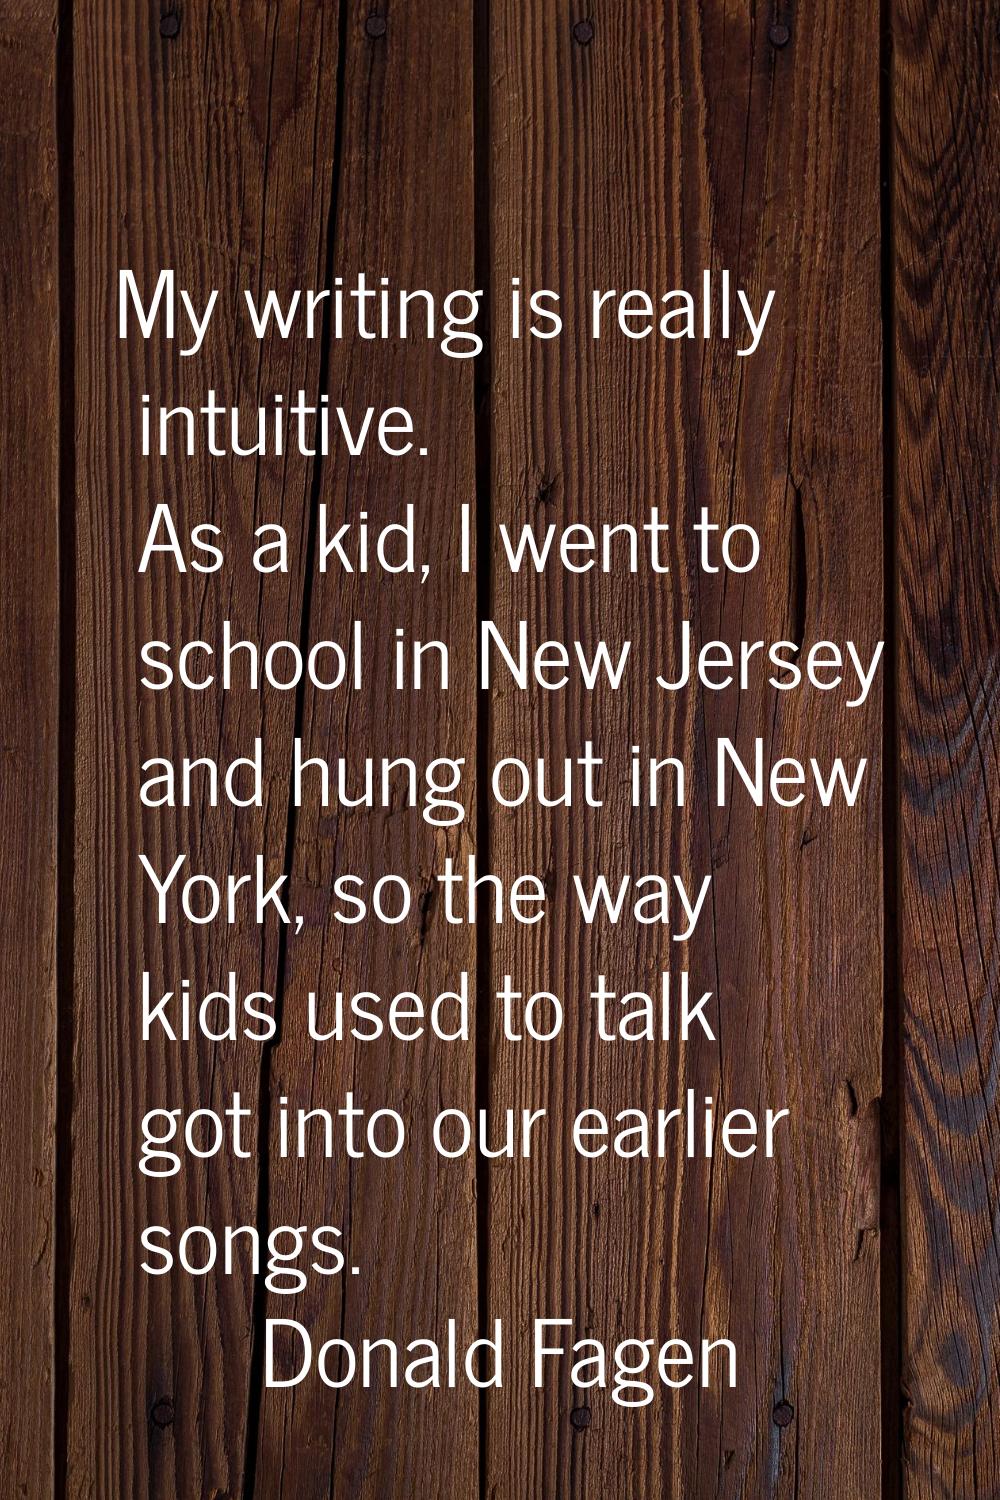 My writing is really intuitive. As a kid, I went to school in New Jersey and hung out in New York, 